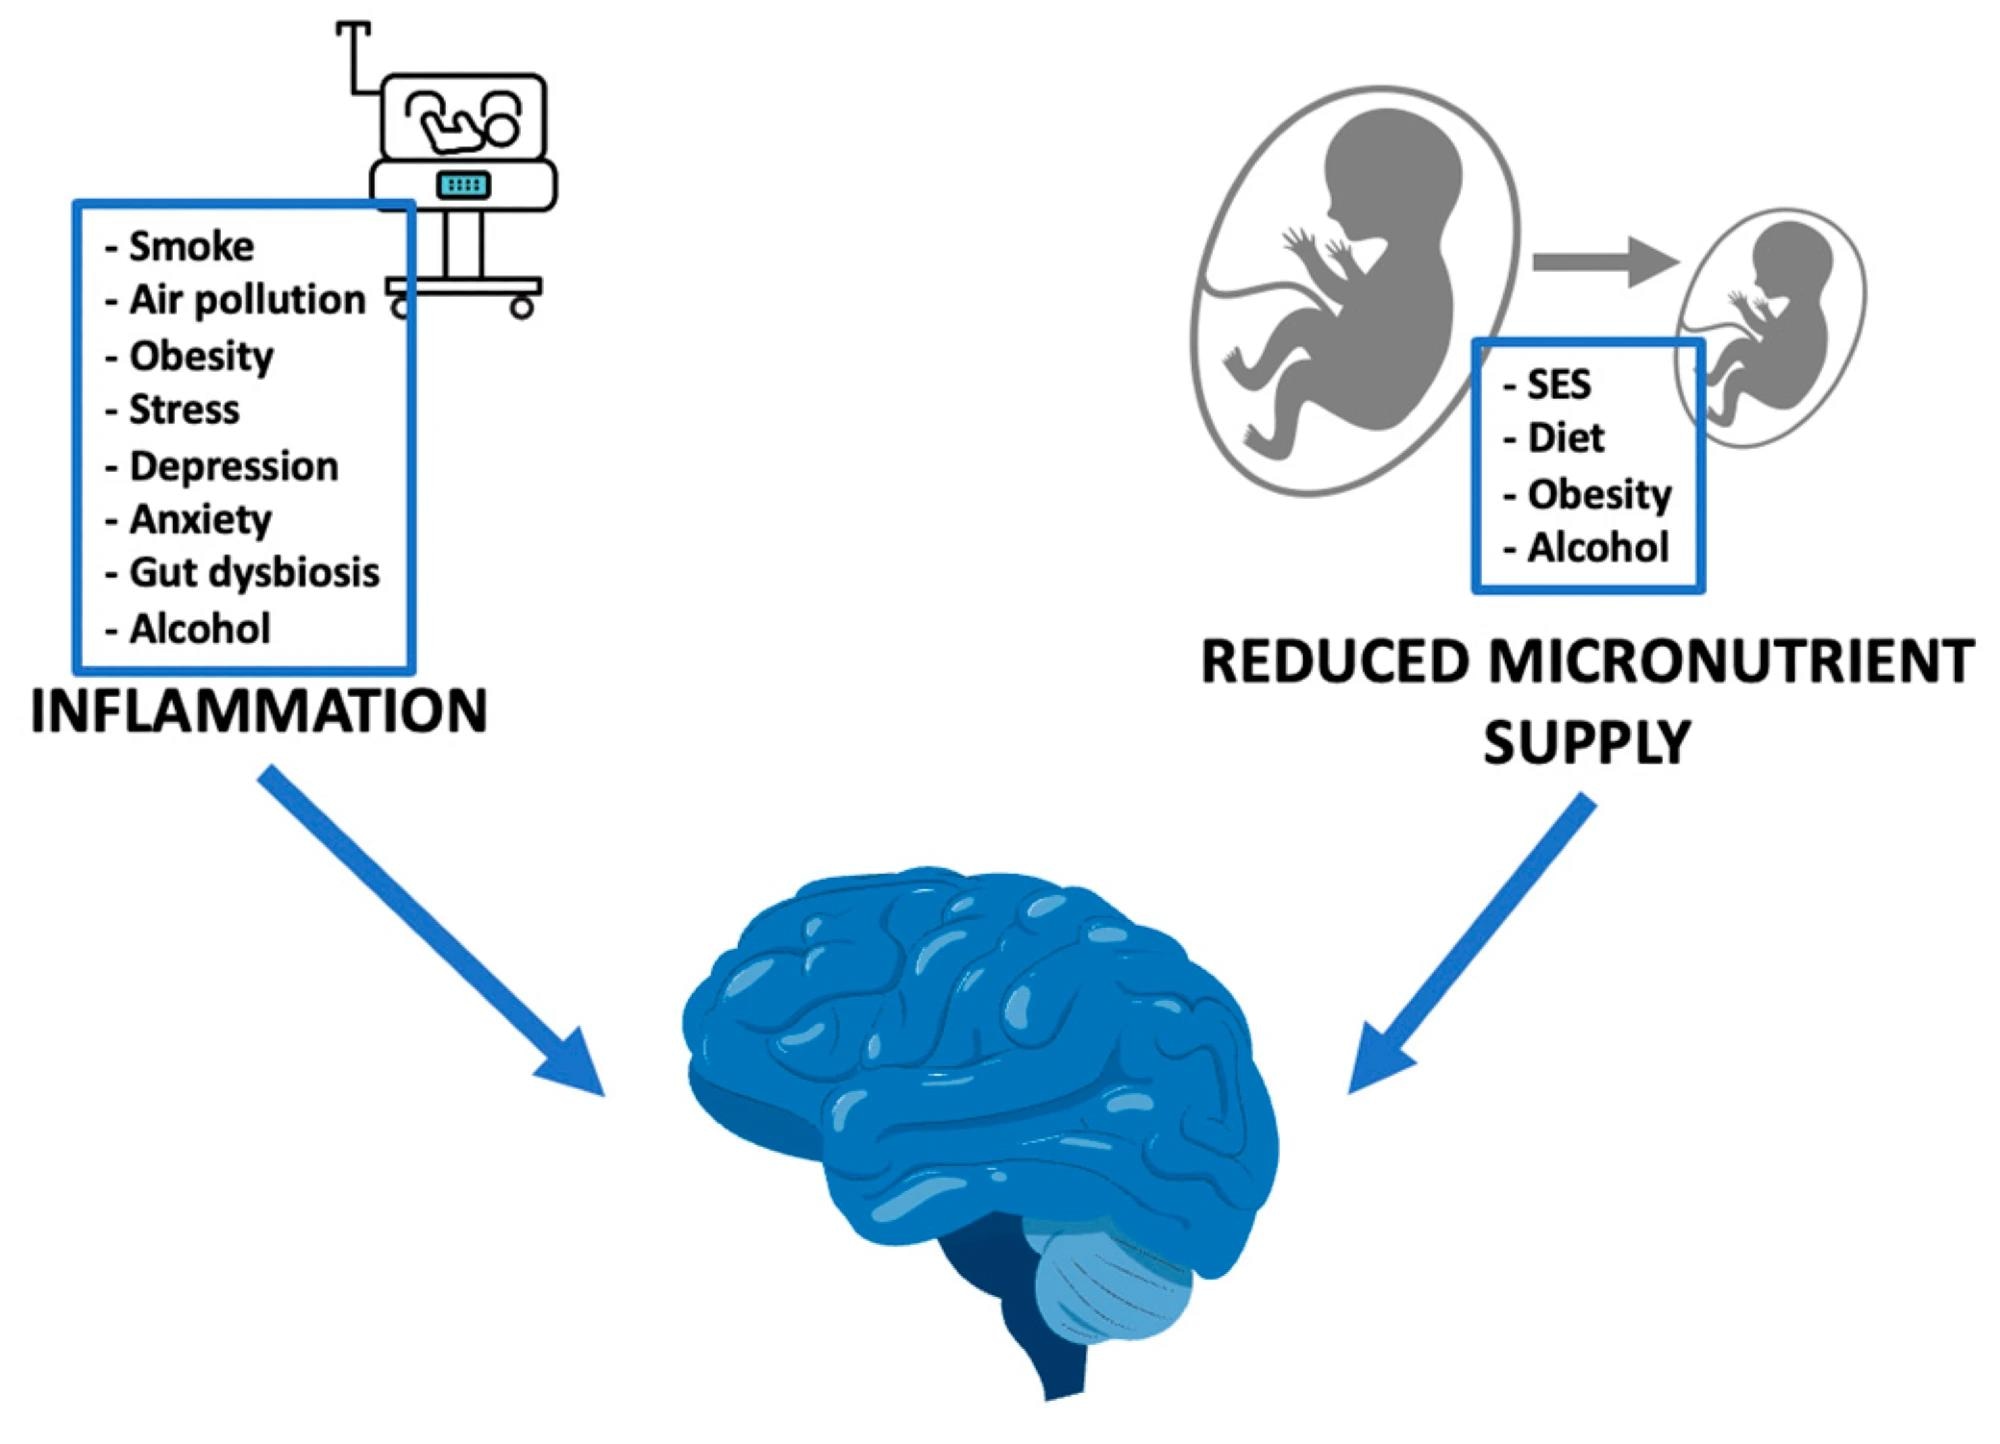 External stimuli, through inflammation and reduced micronutrient supply, impact on fetal neurodevelopment. SES: socioeconomic status.